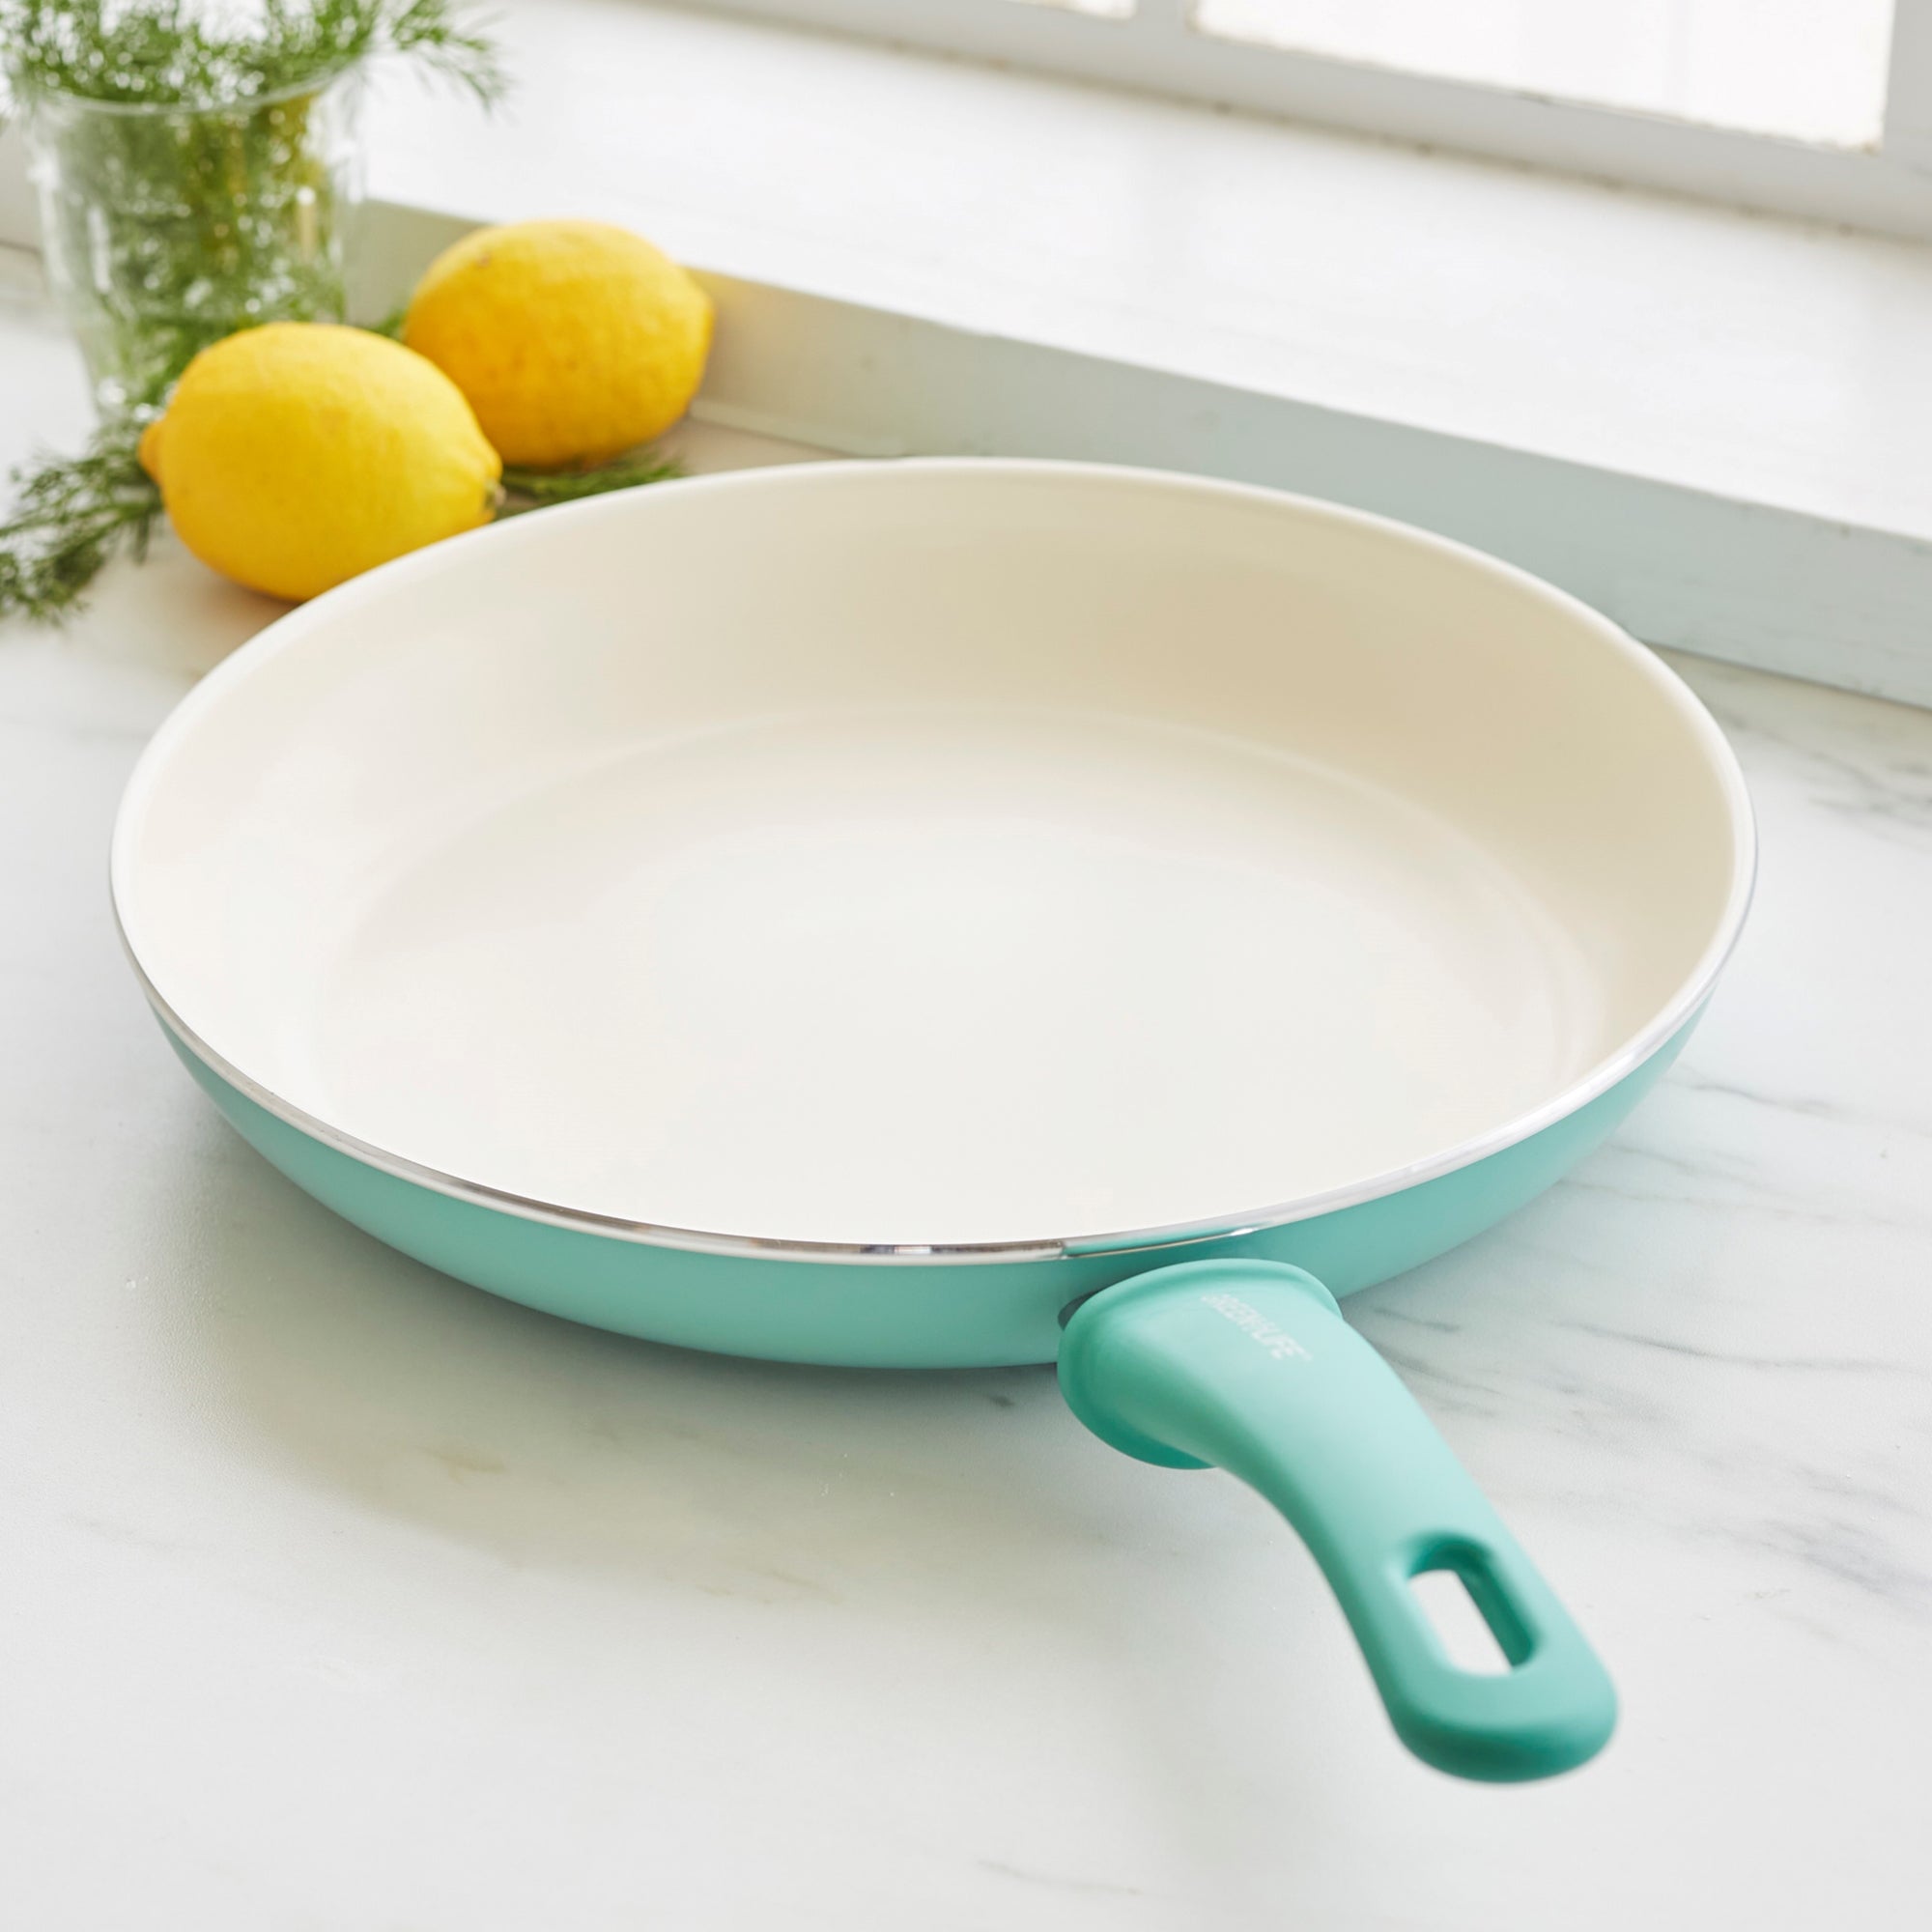 GreenLife Soft Grip 12 Ceramic Non-Stick Open Frypan, Turquoise -  CW000524-002